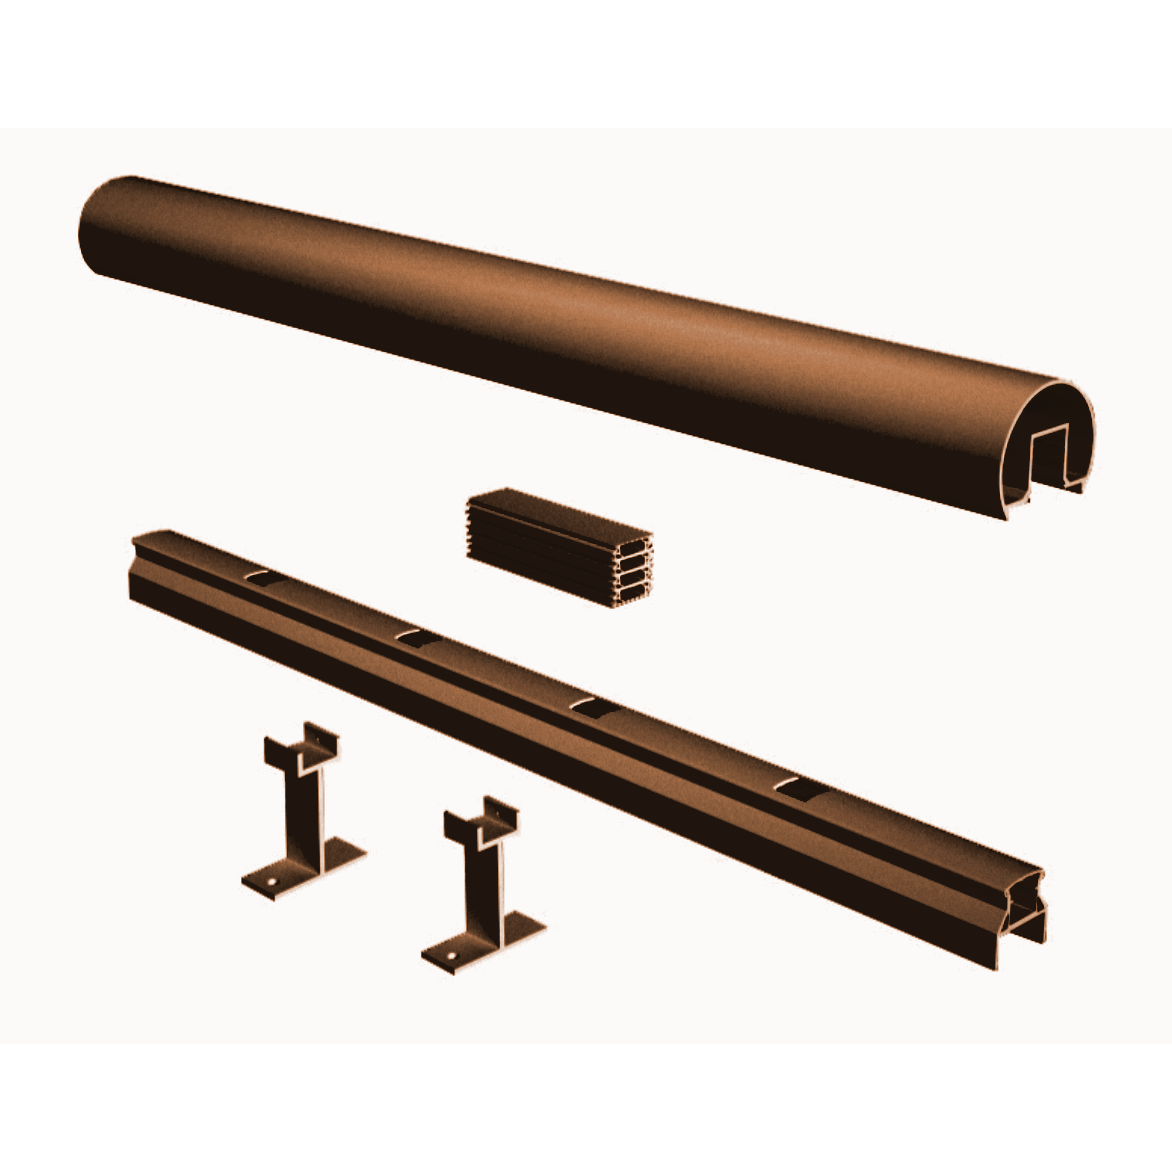 10' Century Top & Bottom Rail for 5/8" Stair Picket, Lakeside Copper